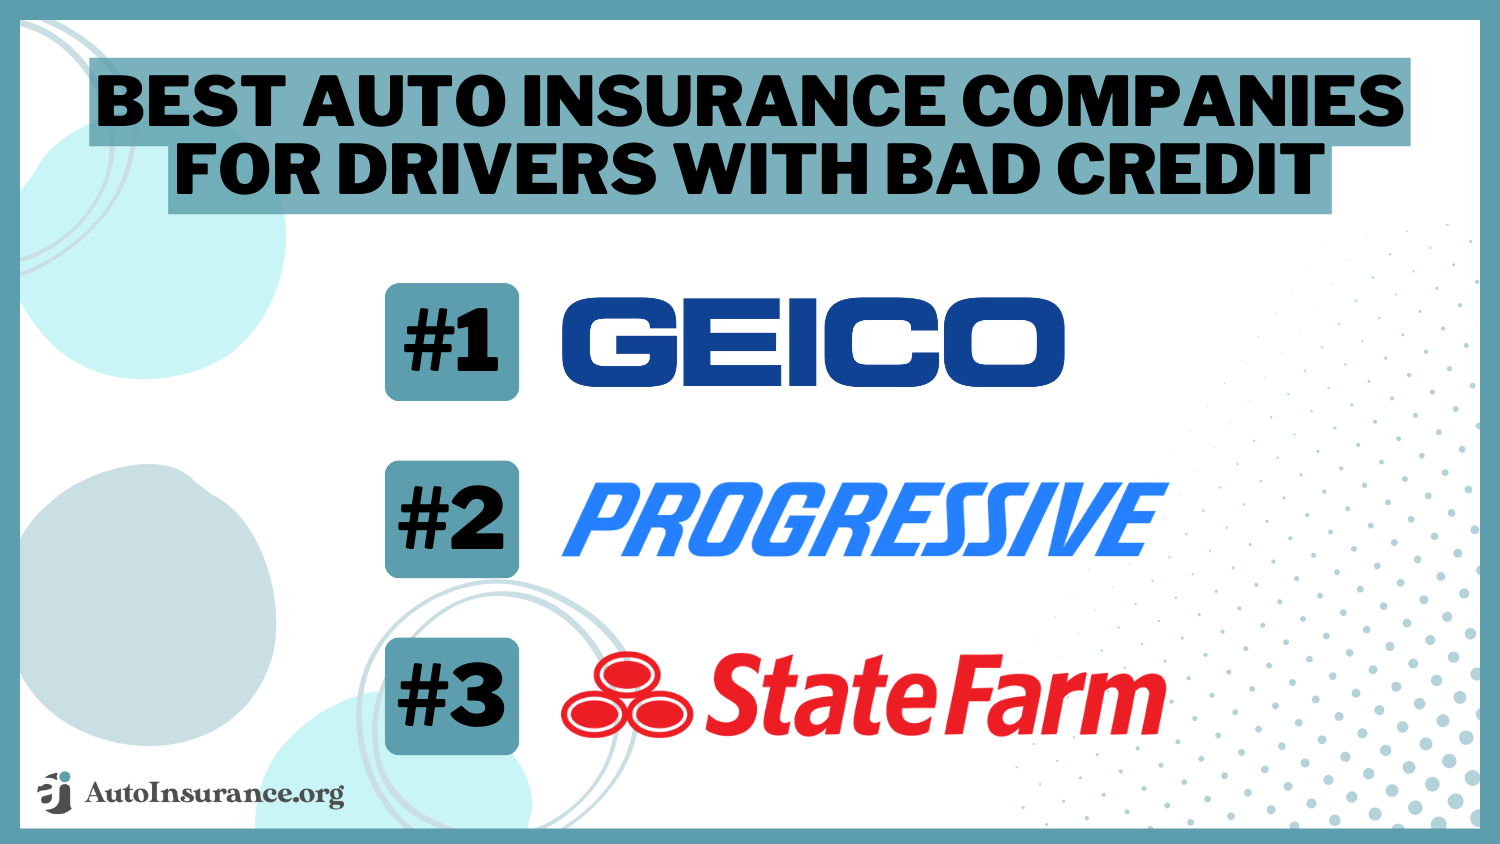 Best Auto Insurance Companies for Drivers With Bad Credit: Geico, Progressive, State Farm 